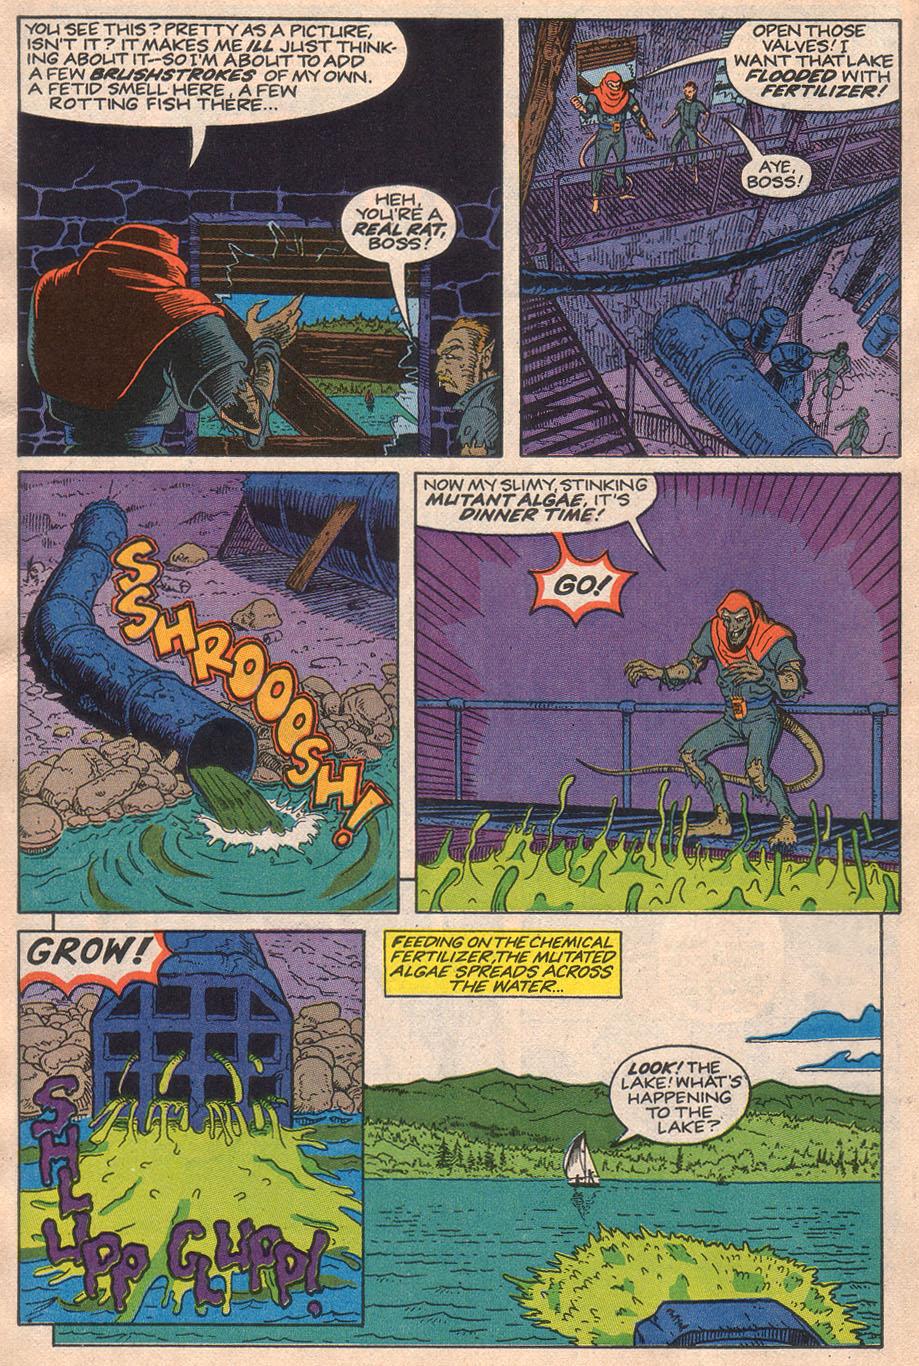 Captain Planet and the Planeteers 6 Page 3